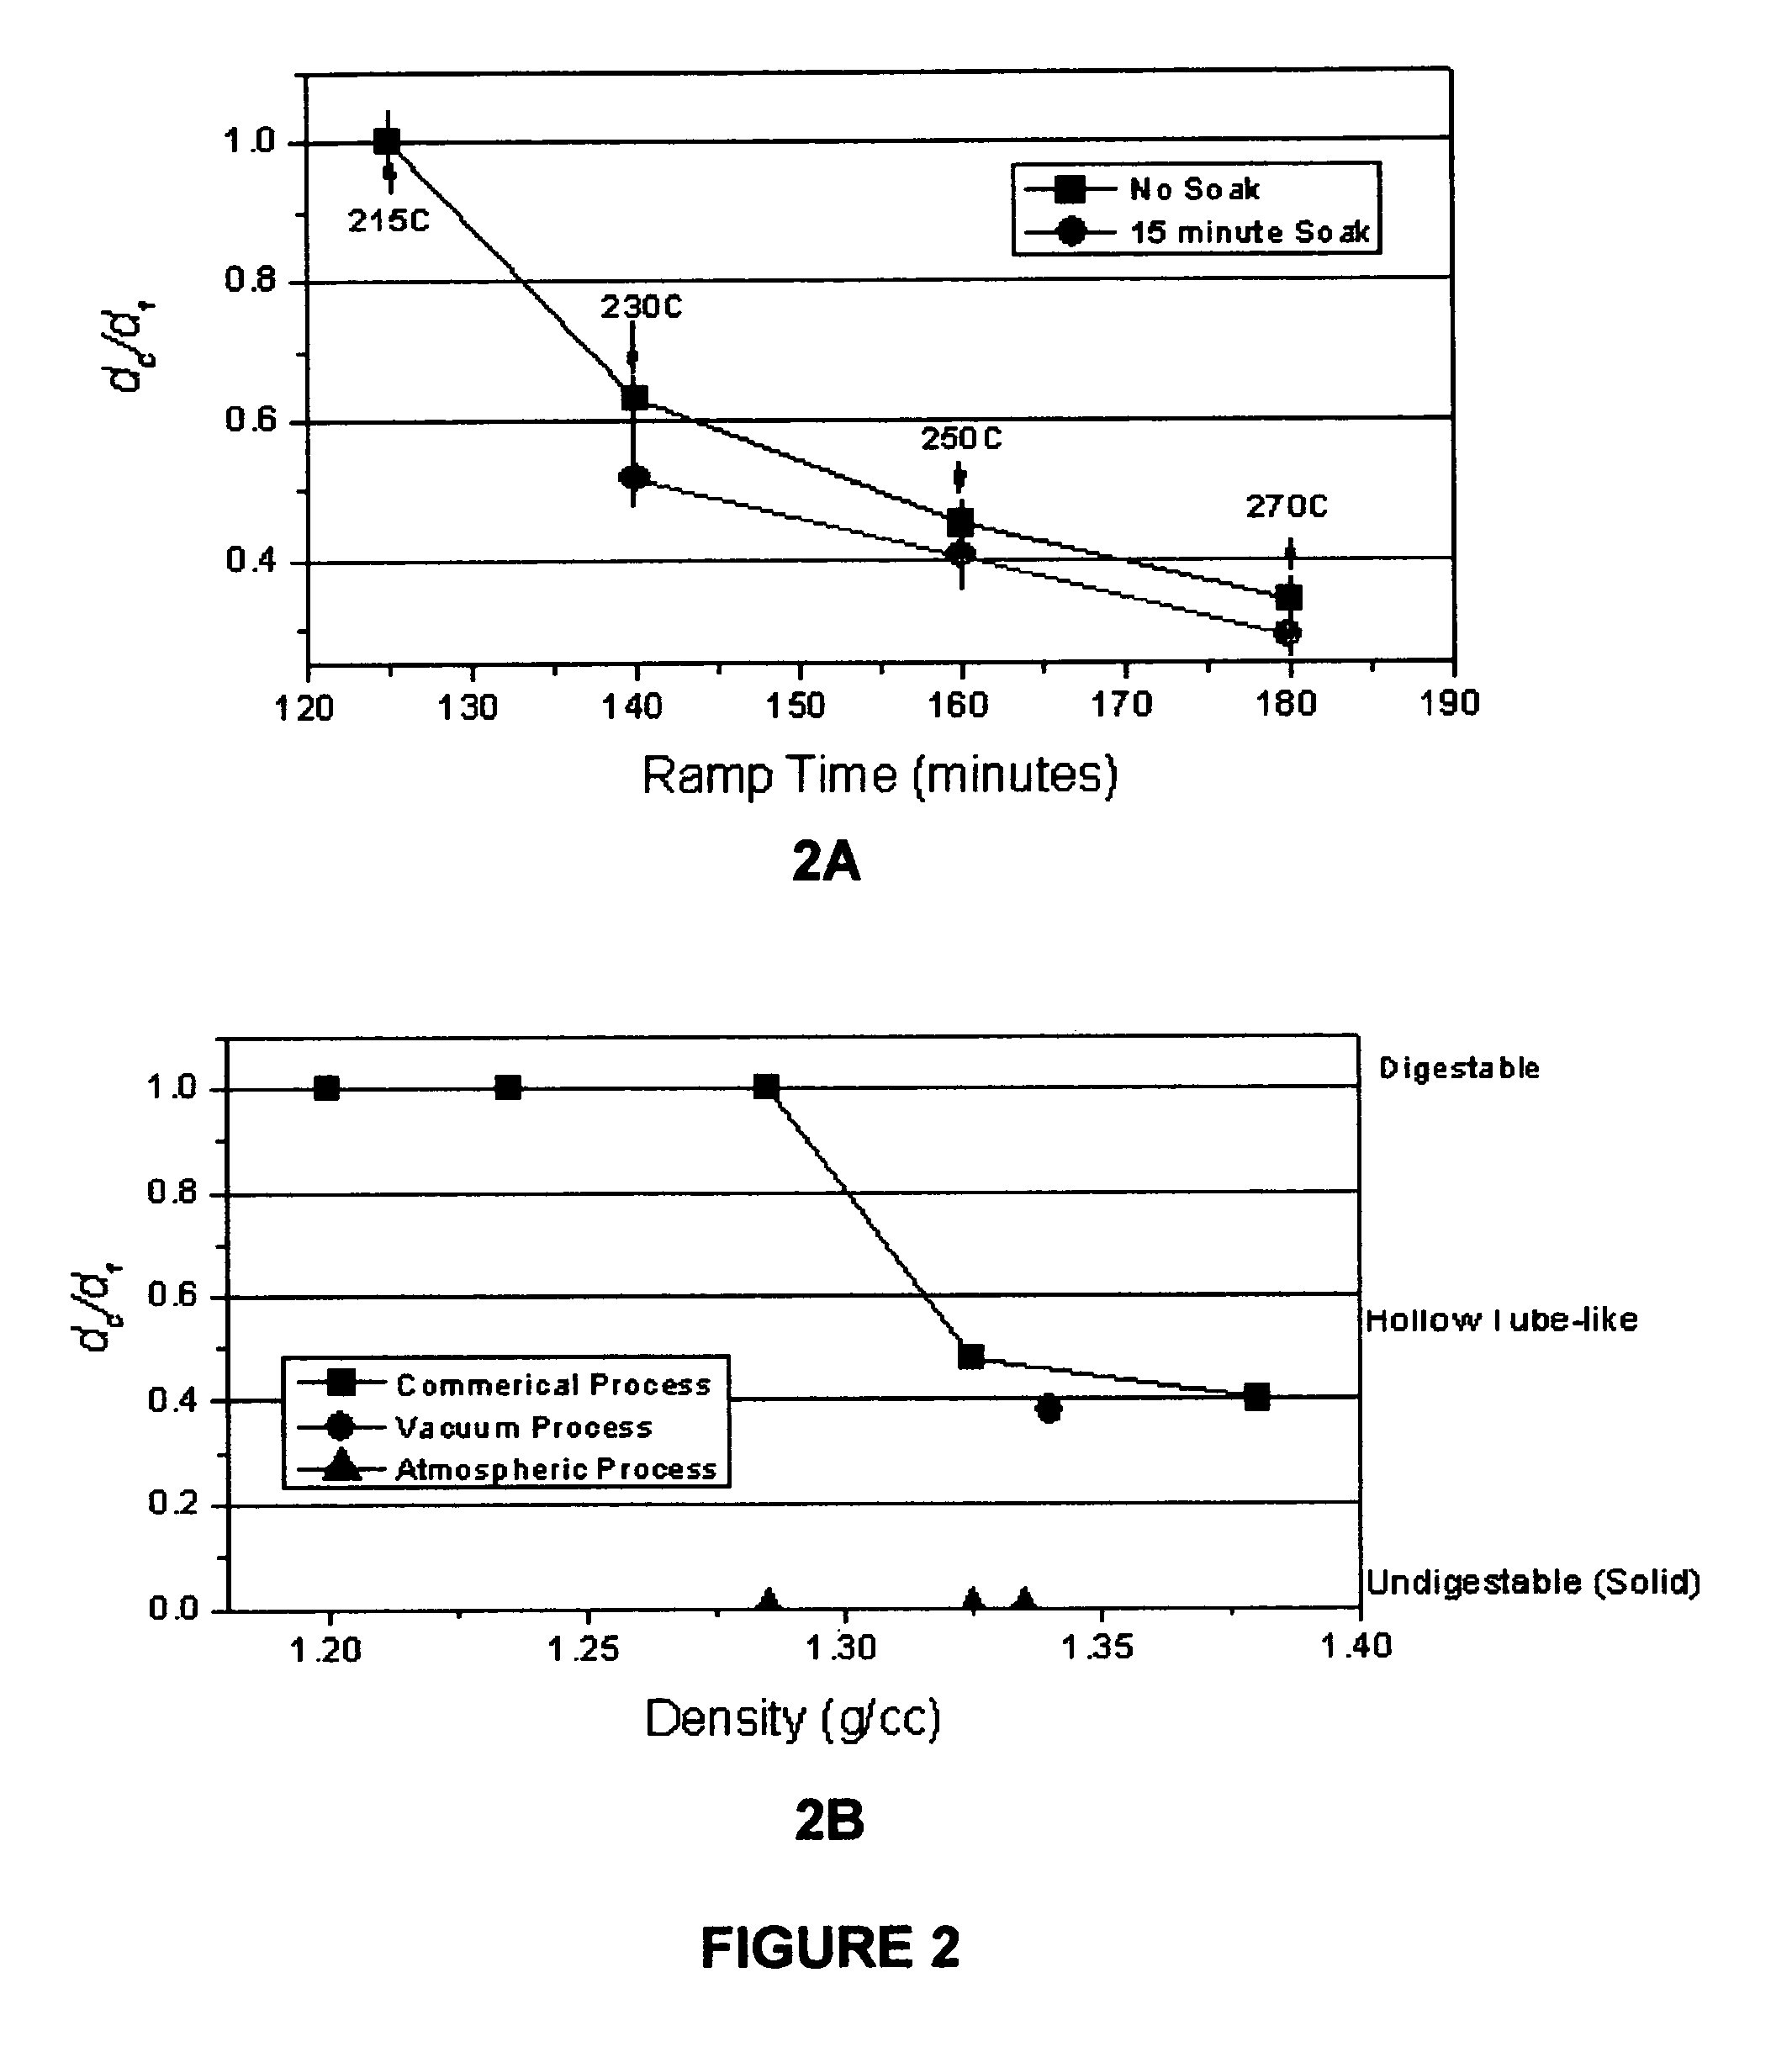 Apparatus and method for oxidation and stabilization of polymeric materials